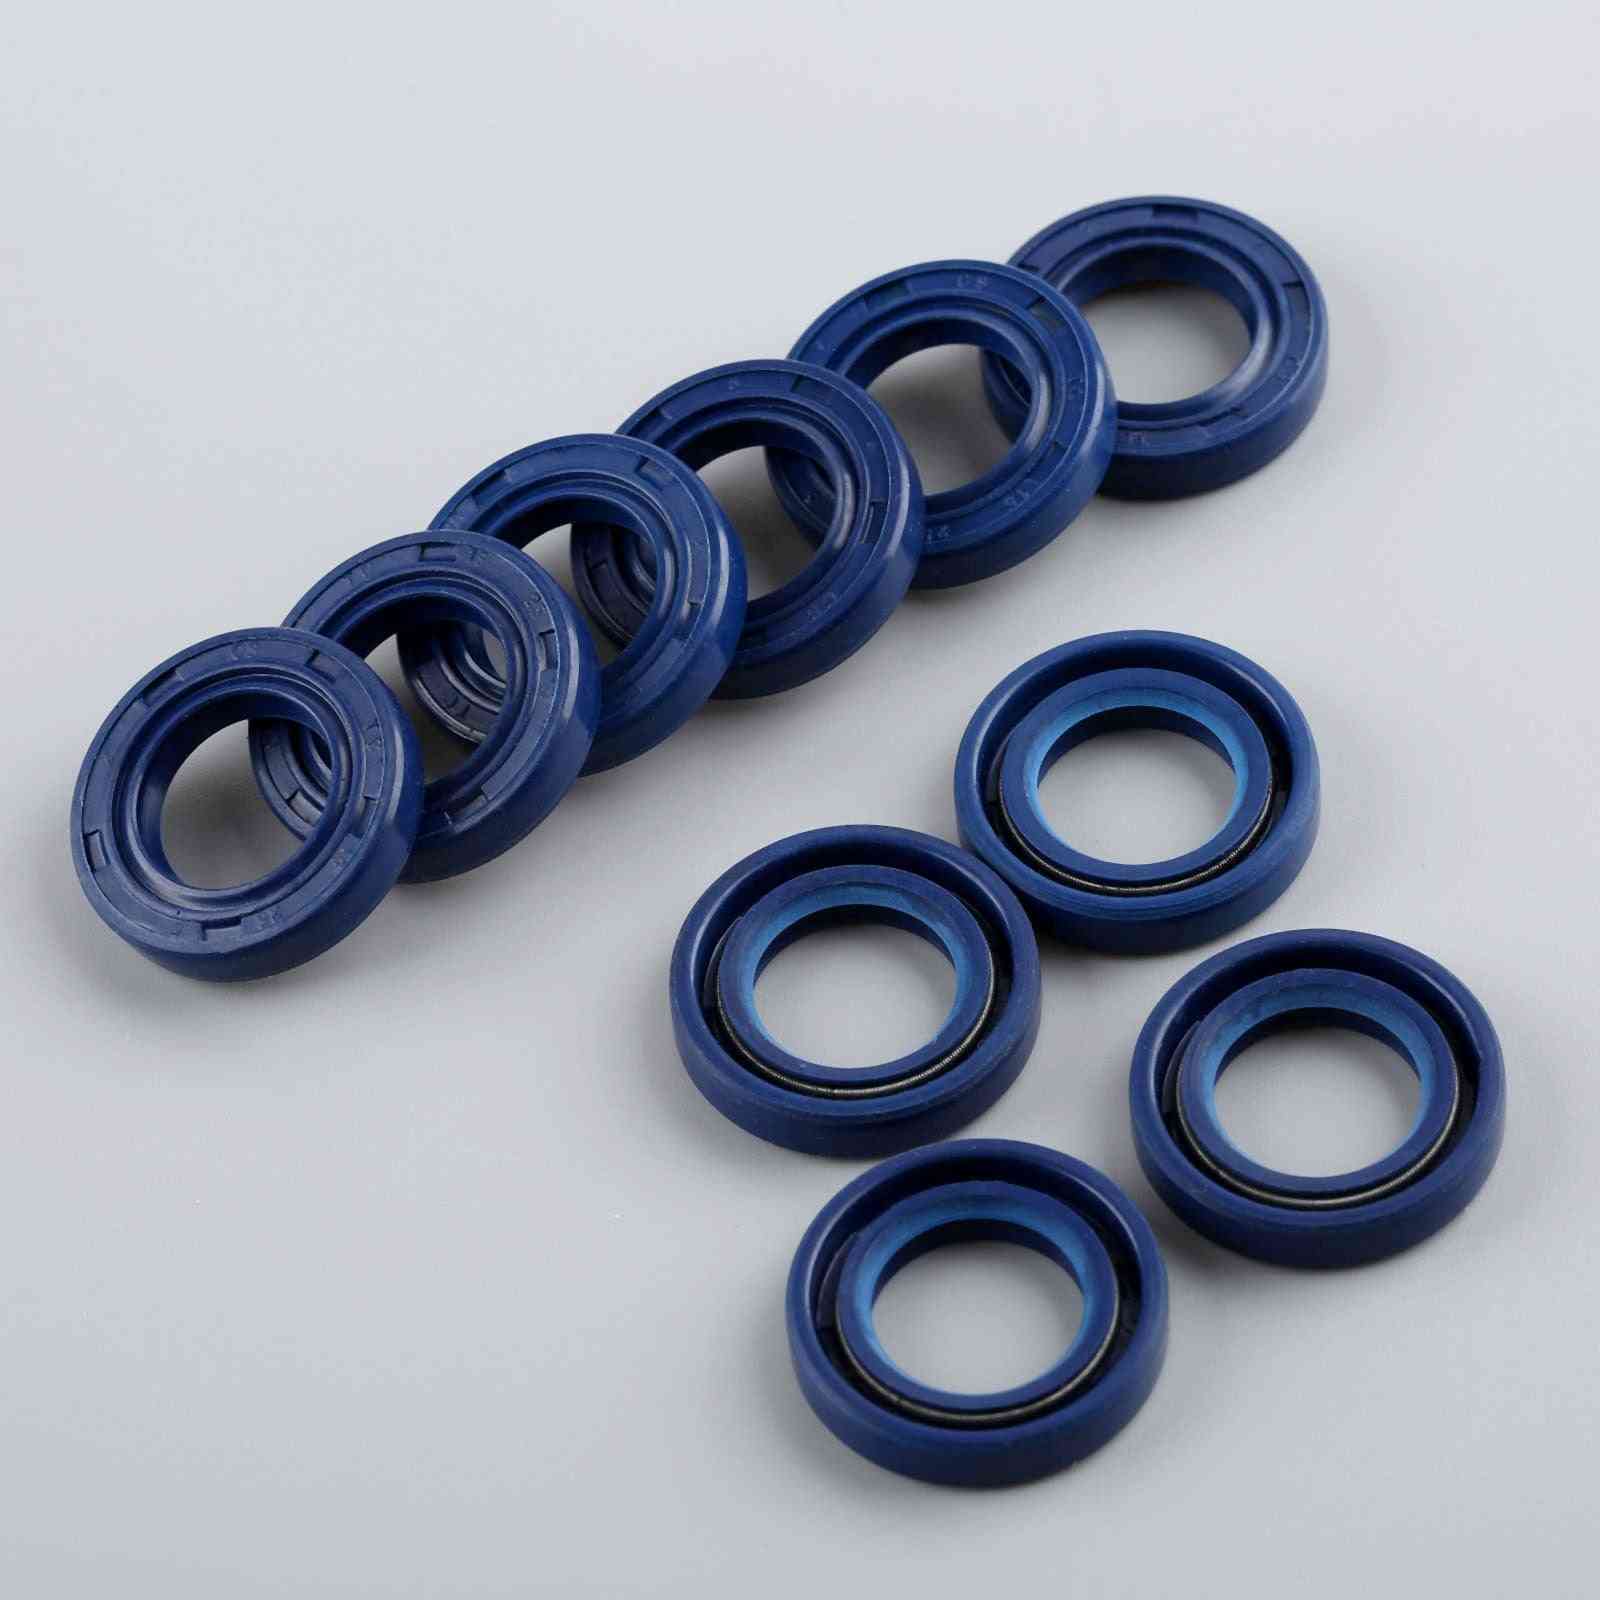 Chain Saw Oil Seal Kit Fit For Stihl